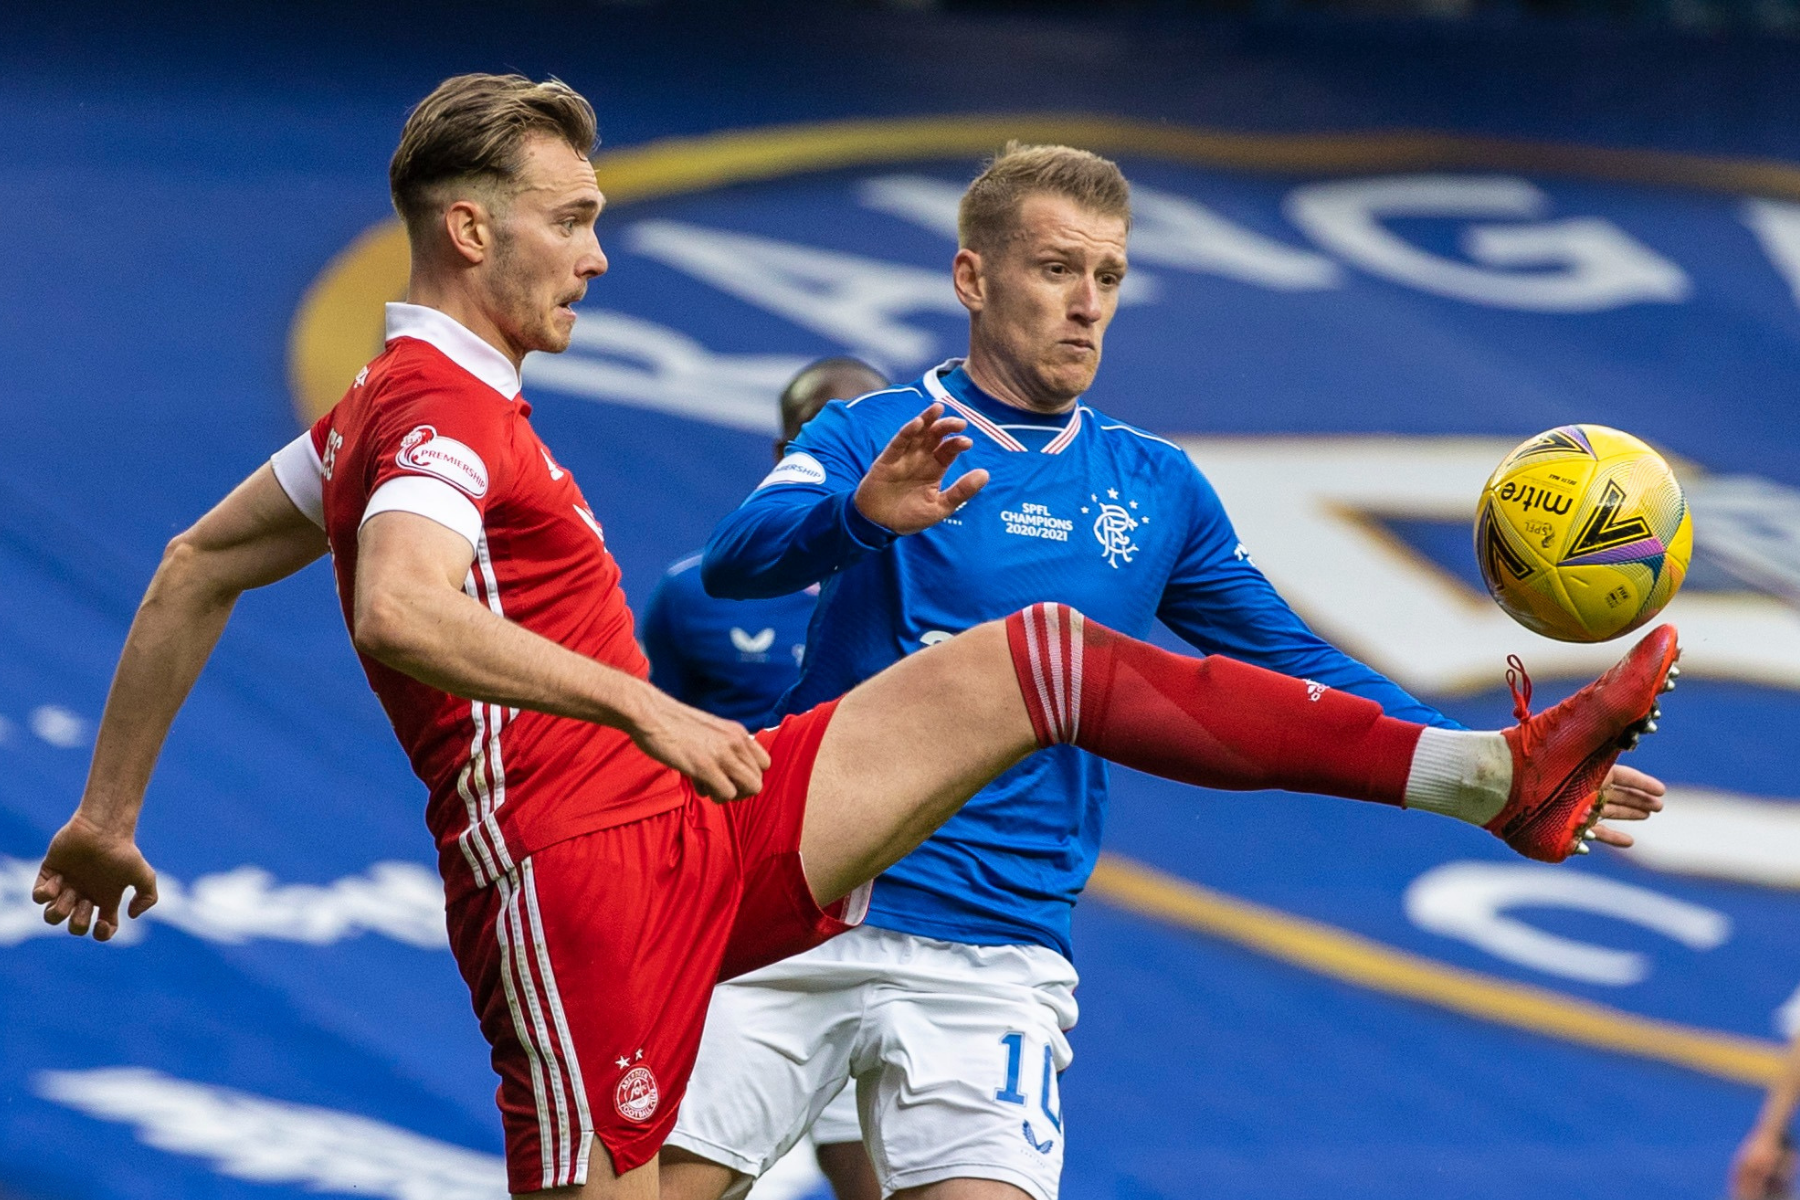 Rangers vs Aberdeen: Live stream, kick-off time and team news for Scottish Premiership clash